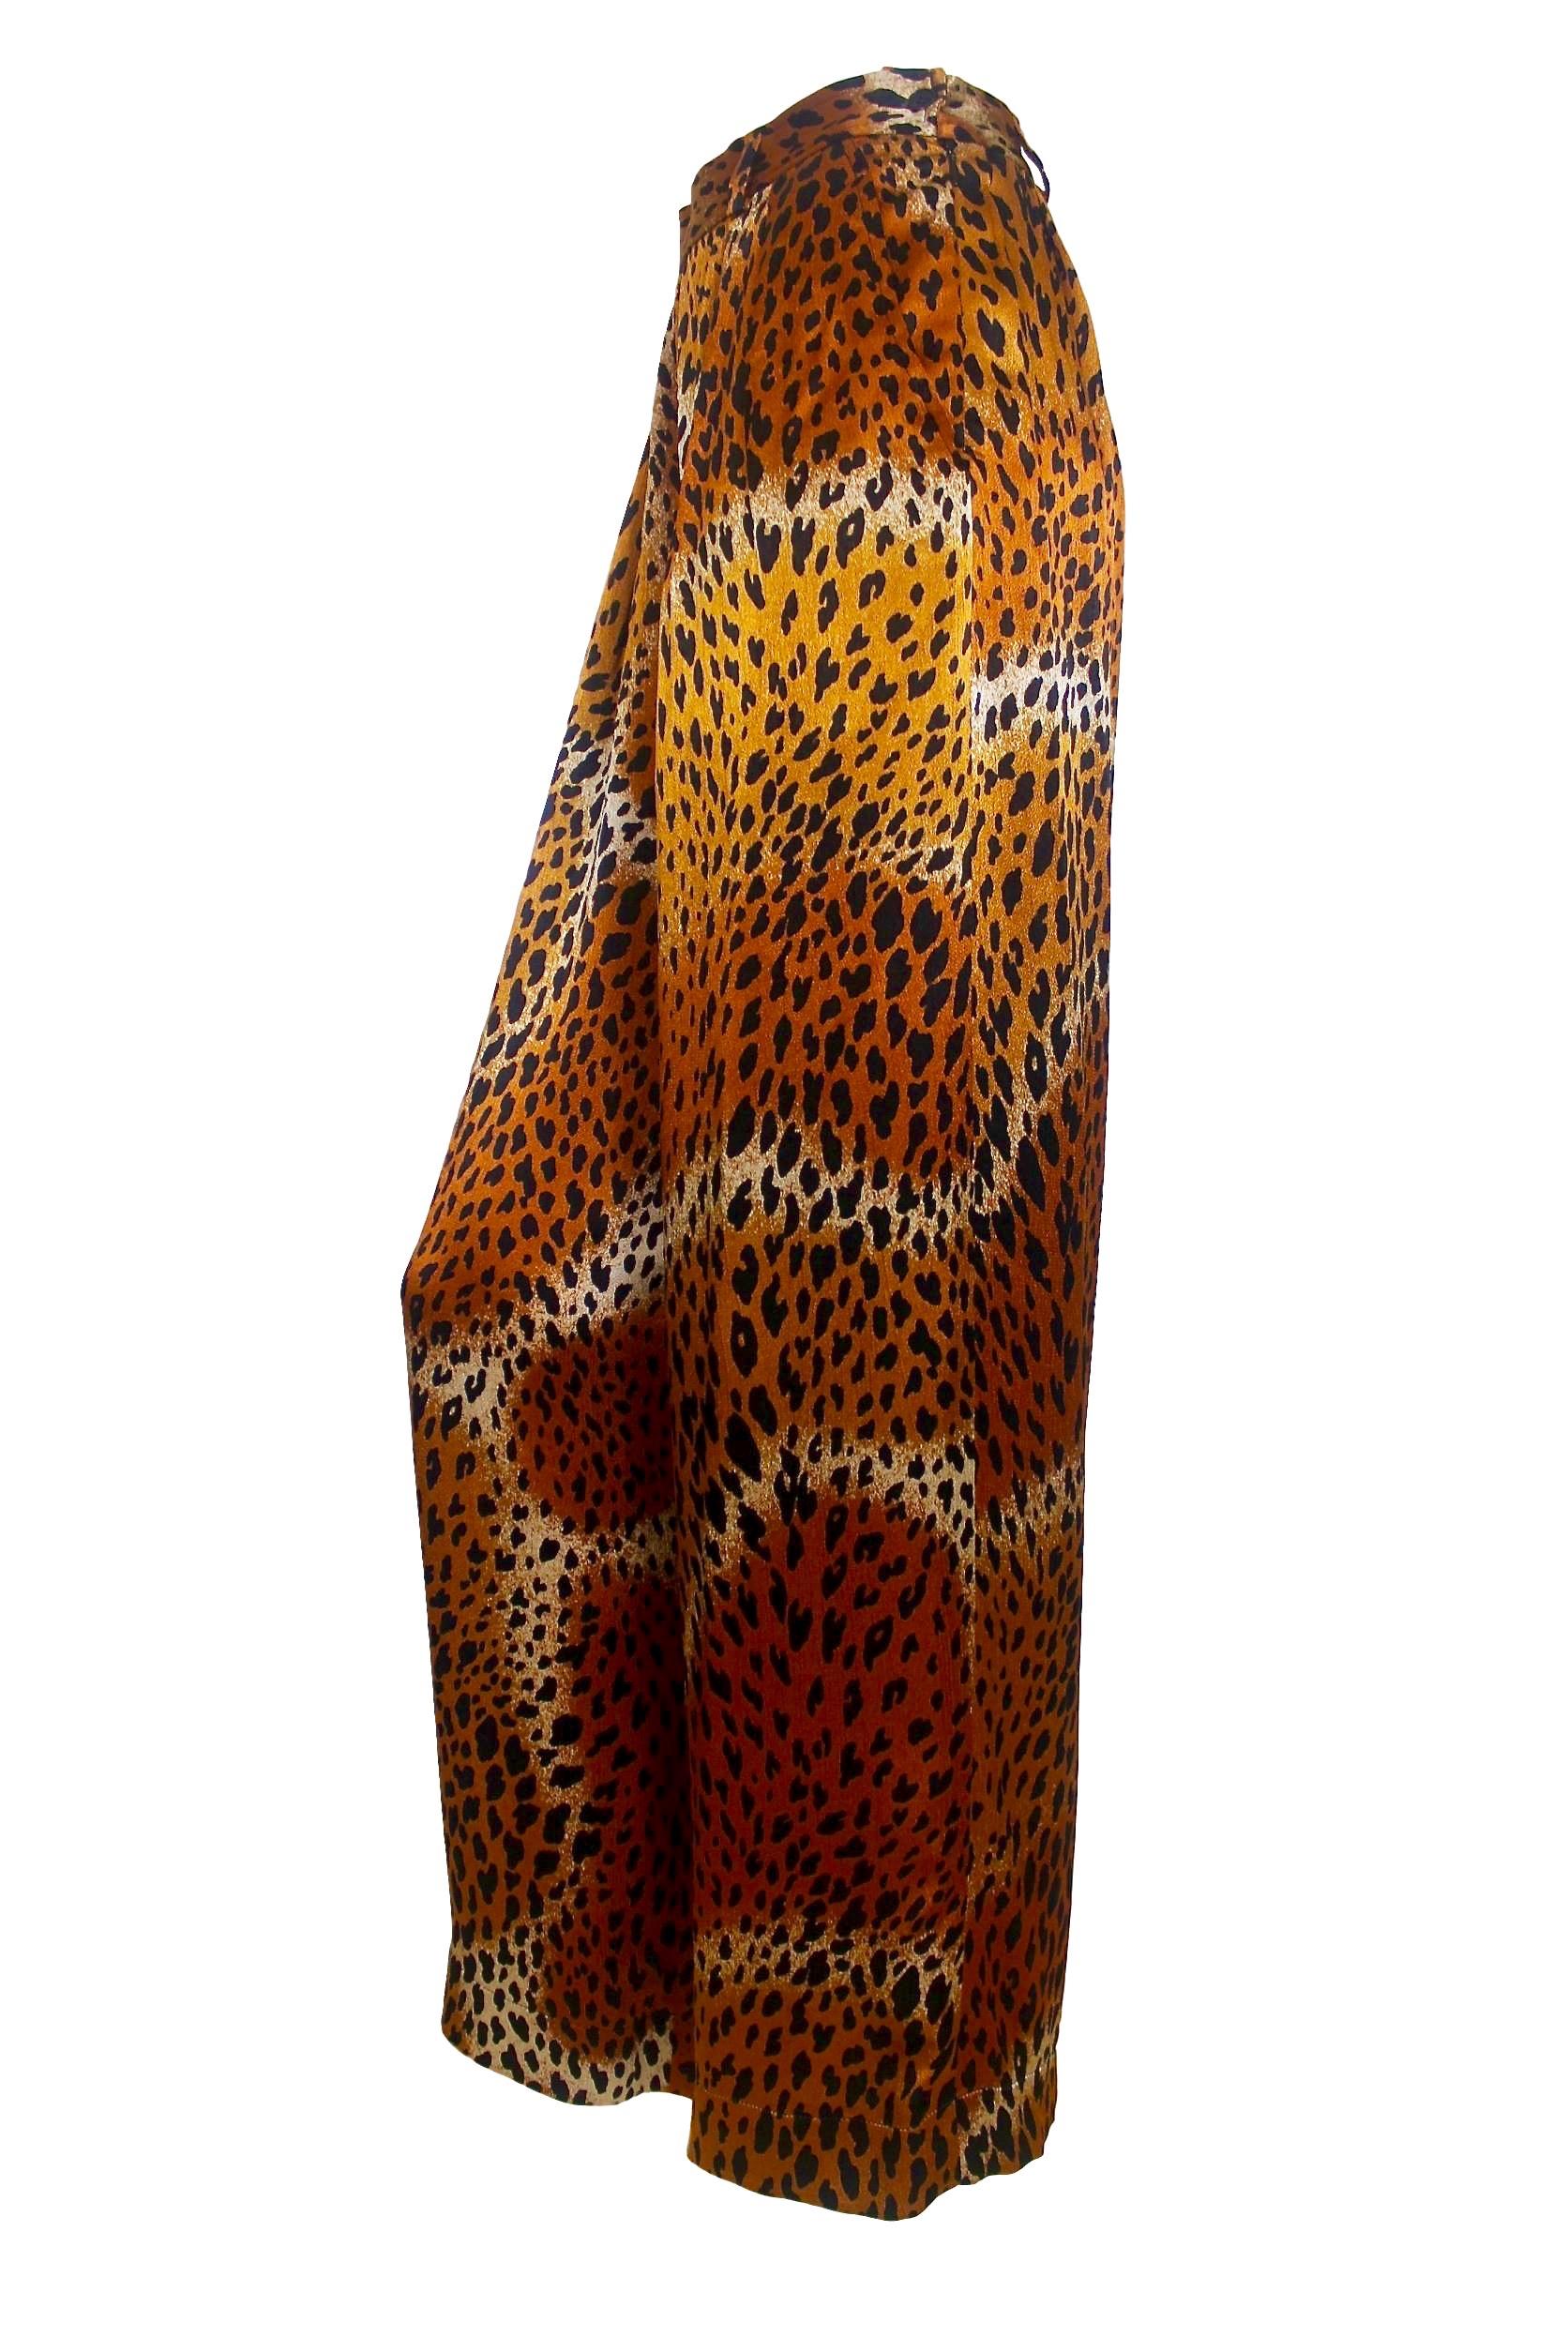 Yves Saint Laurent 1977 Leopard Print Camisole and Trousers For Sale 11